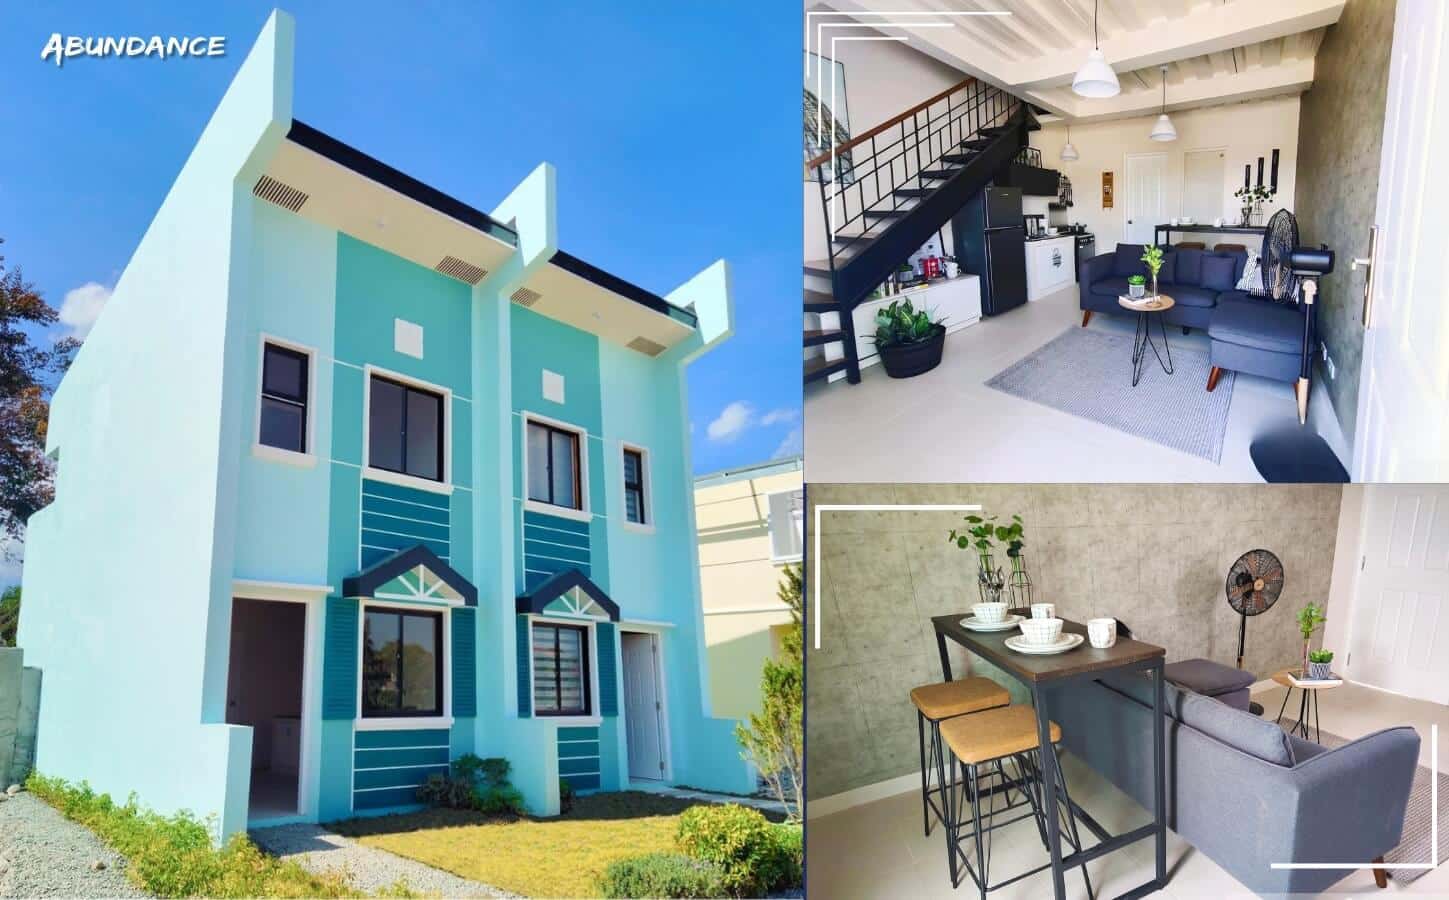 Wellford Homes Malolos - Yvonne townhouse Model